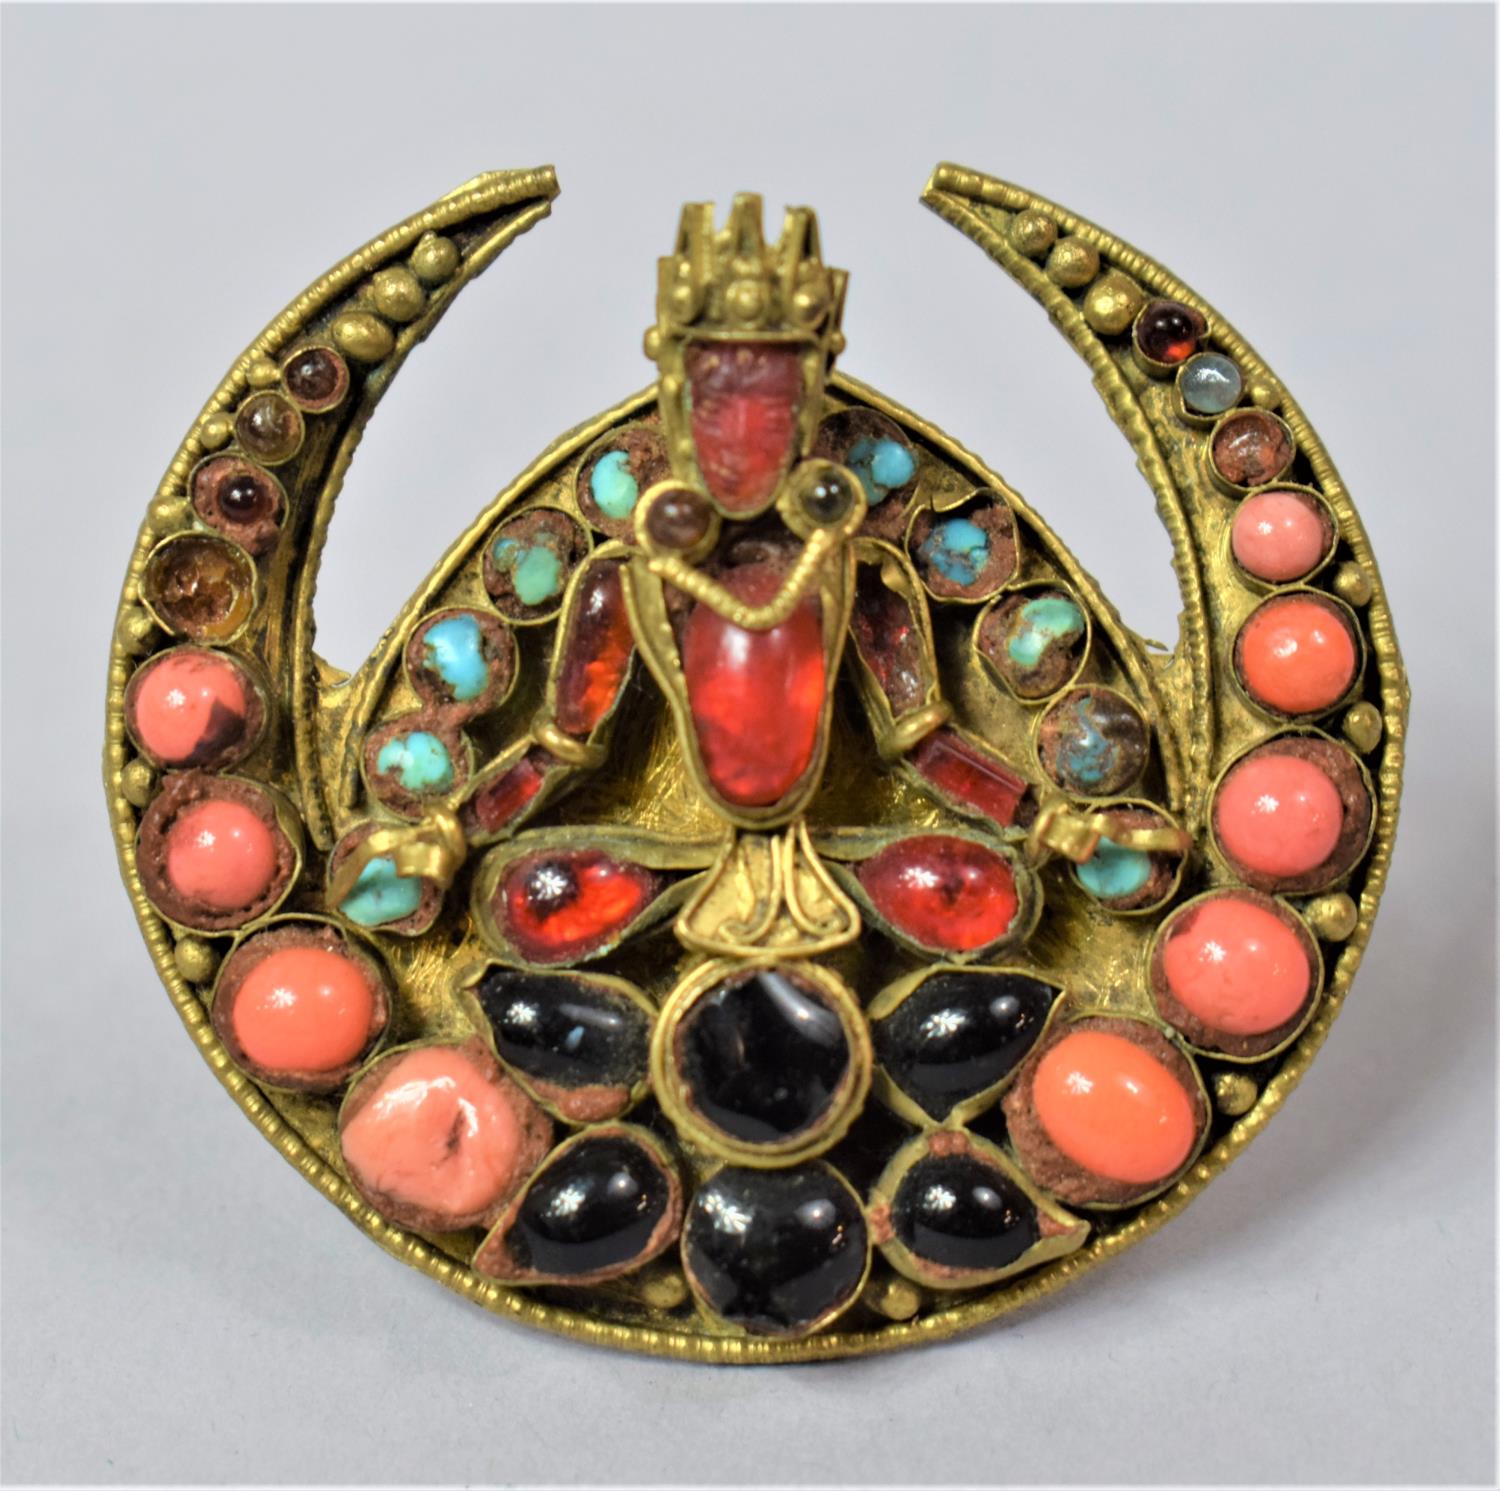 A Large Nepalese/Tibetan Circular Brooch Having Coral, Turquoise and Glass Mounts in the Form of